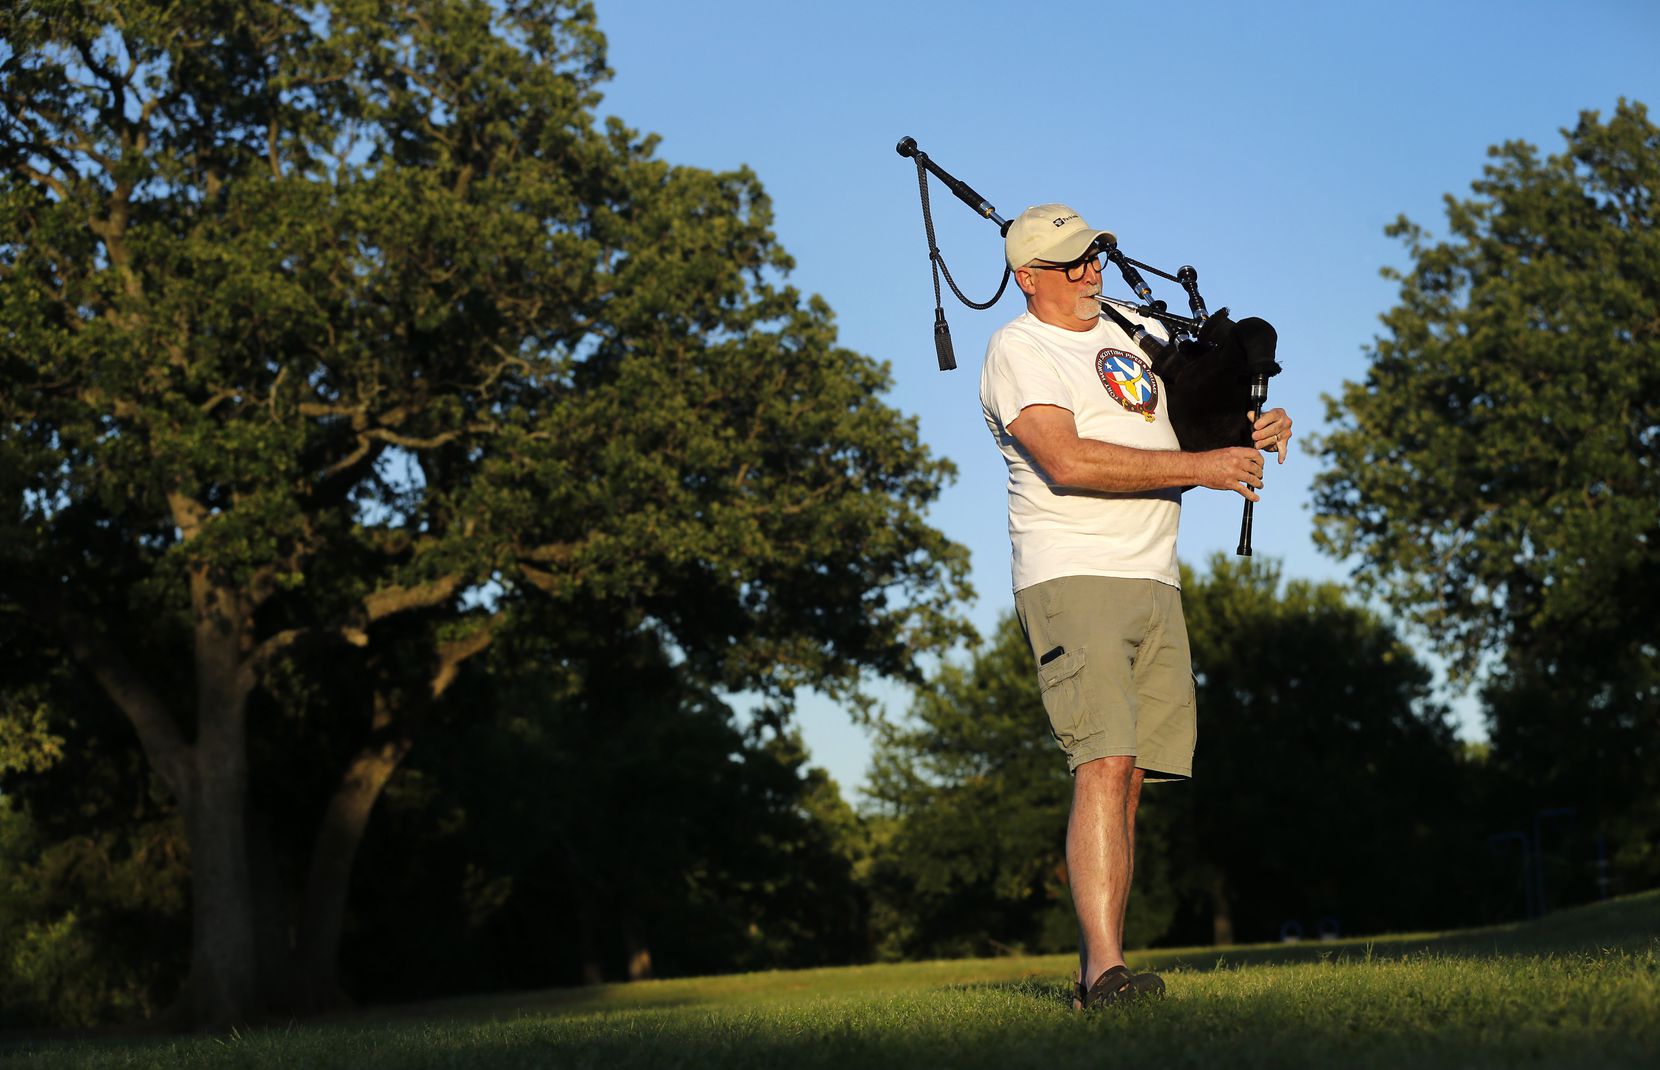 Bagpiper Tony Hill, 63, a safety analyst for a Dallas hospital, practiced Wednesday at Gibbins Park in Arlington. “I’ve had several people in the neighborhood tell me it was so nice to hear that music drifting across the neighborhood,” Hill said. 